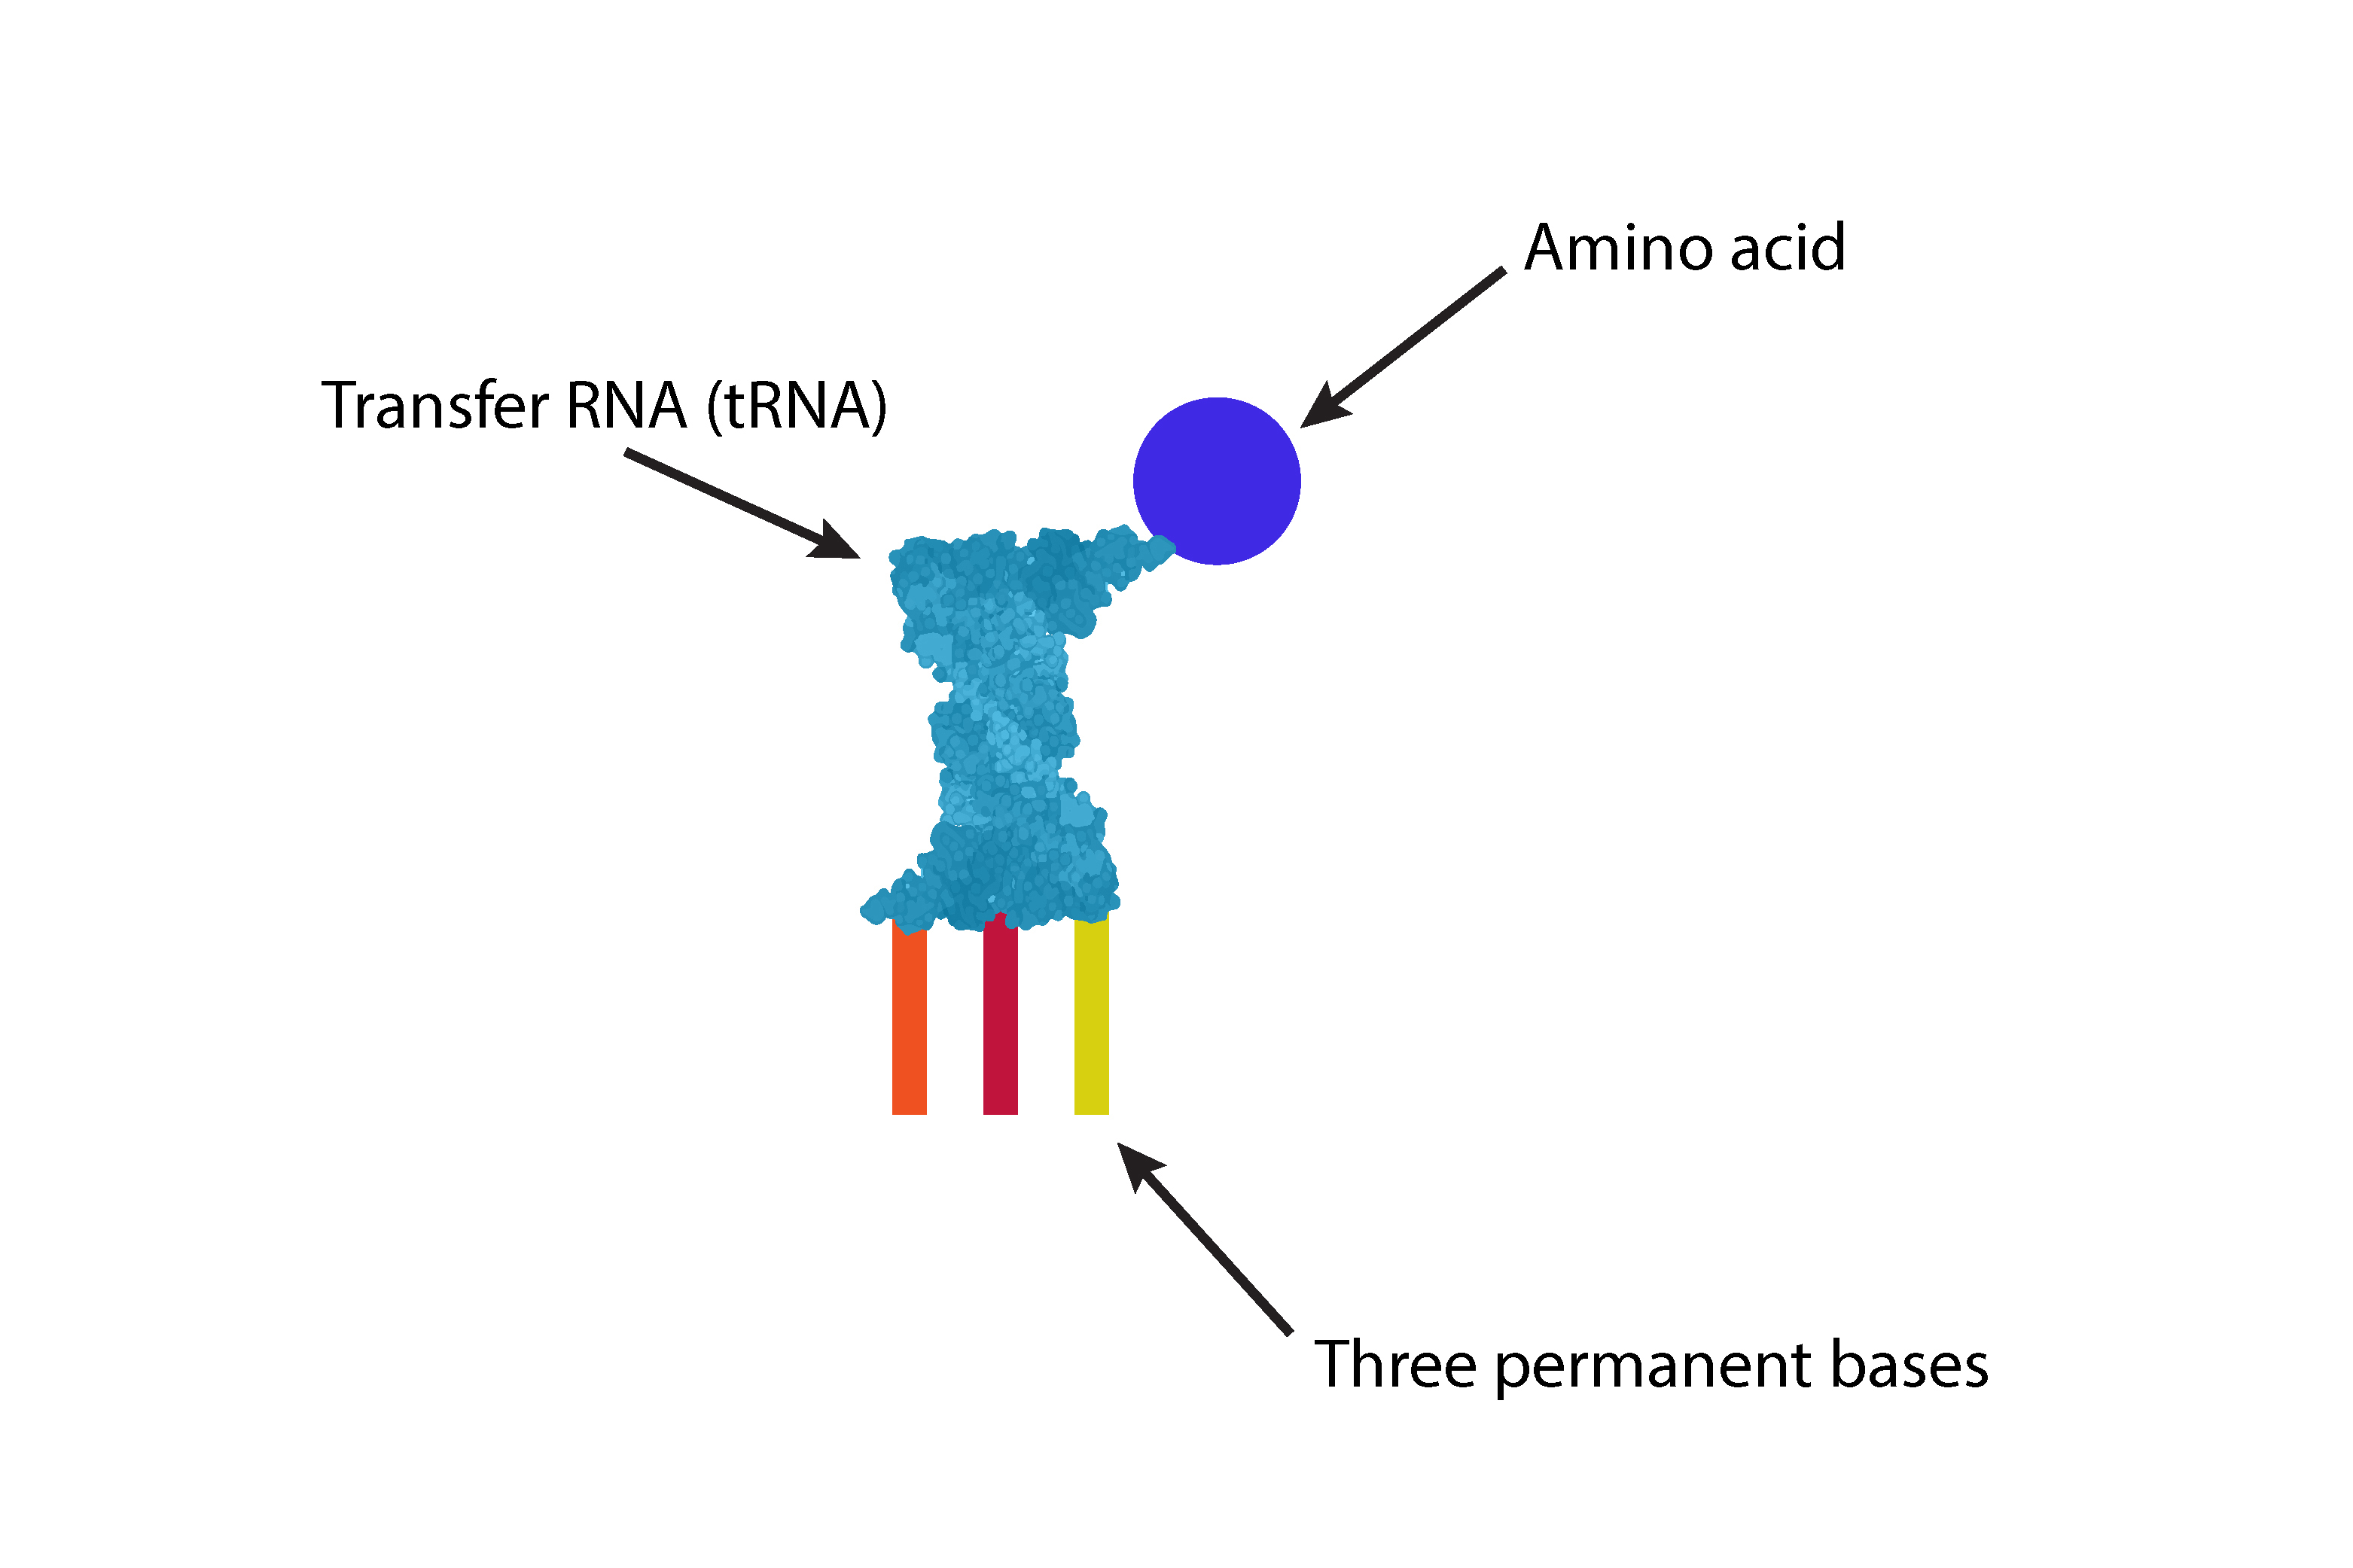 The transfer RNA picks up one of the twenty amino acid that corresponds to the permanent bases 